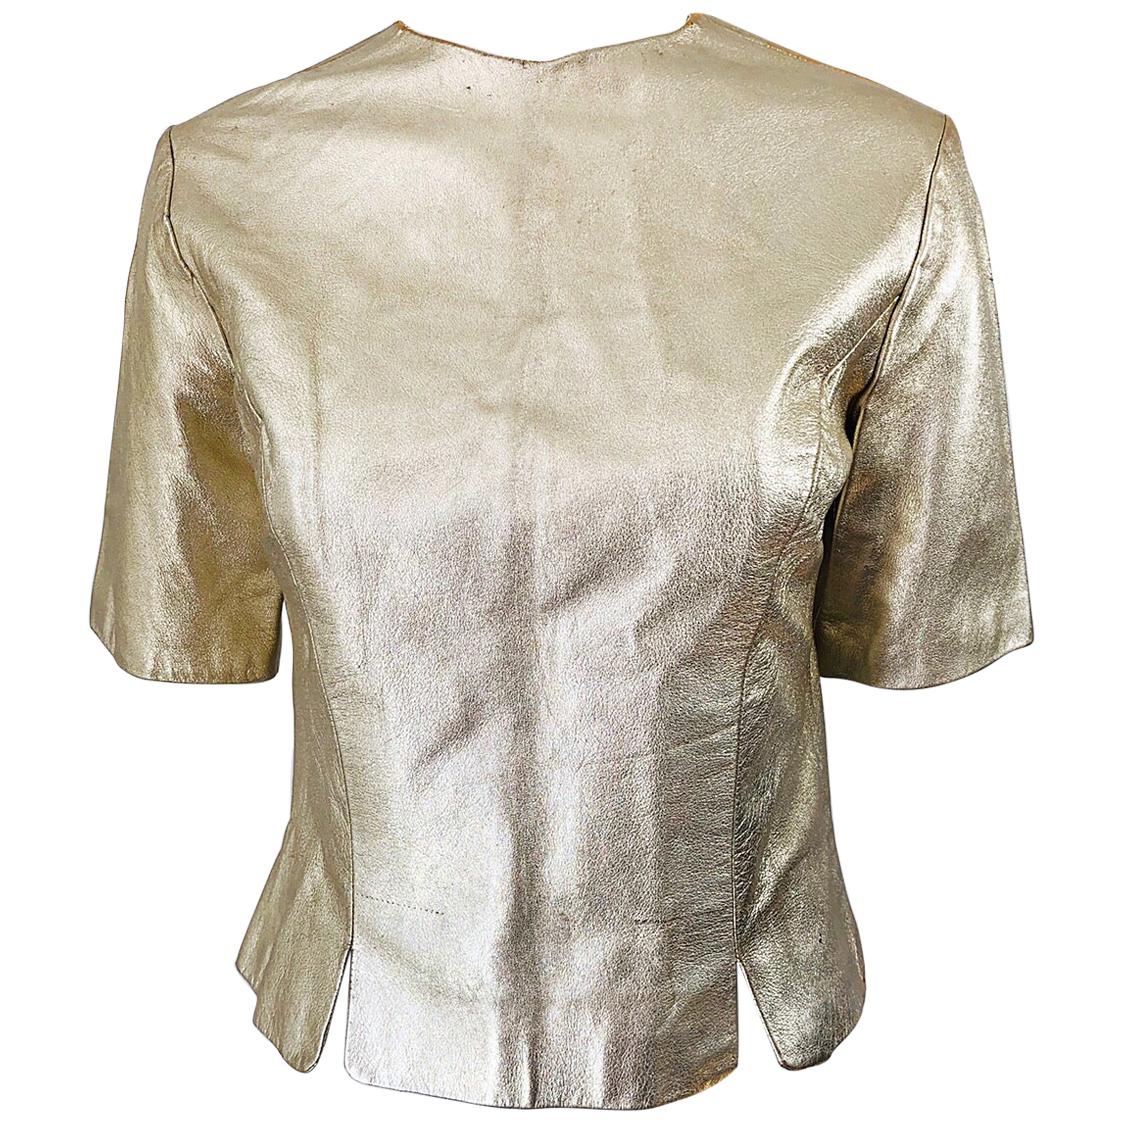 1980s Gold Leather Distressed Fabulous Vintage 80s Shirt / Top / Blouse